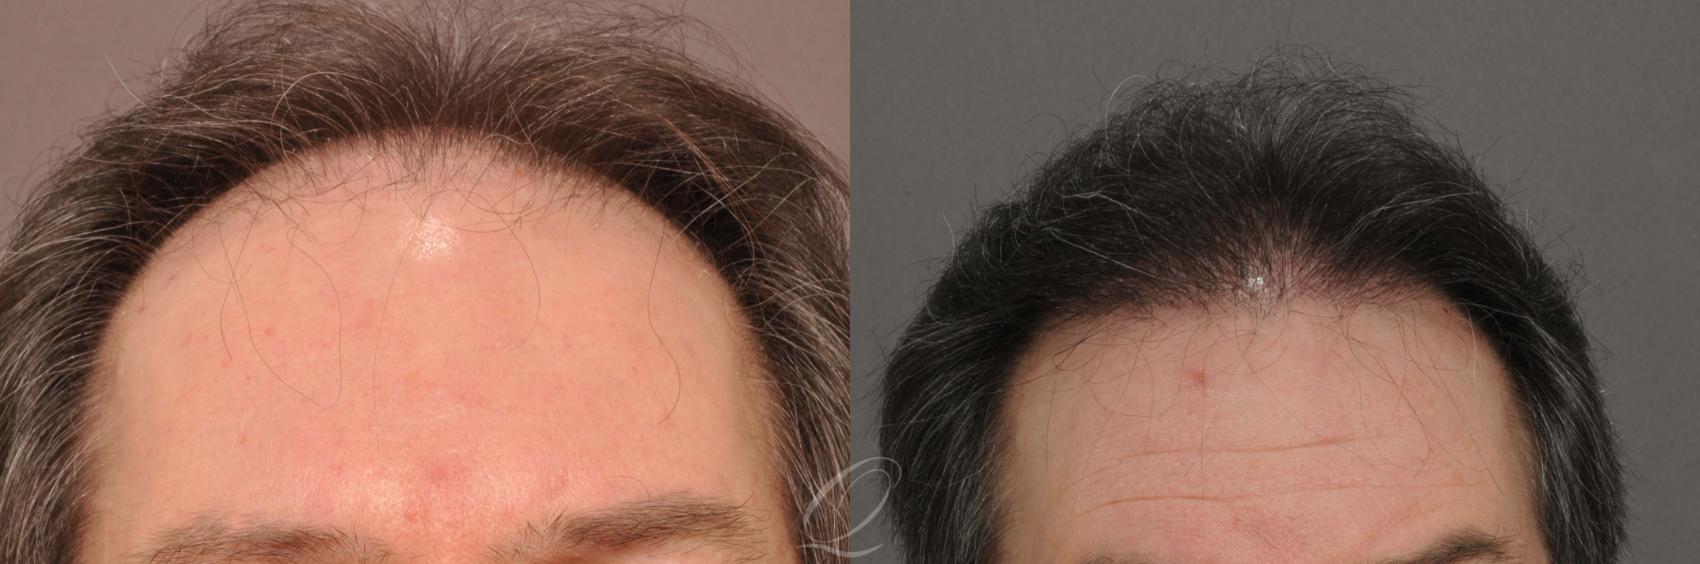 FUT Case 1018 Before & After View #1 | Rochester, Buffalo, & Syracuse, NY | Quatela Center for Hair Restoration